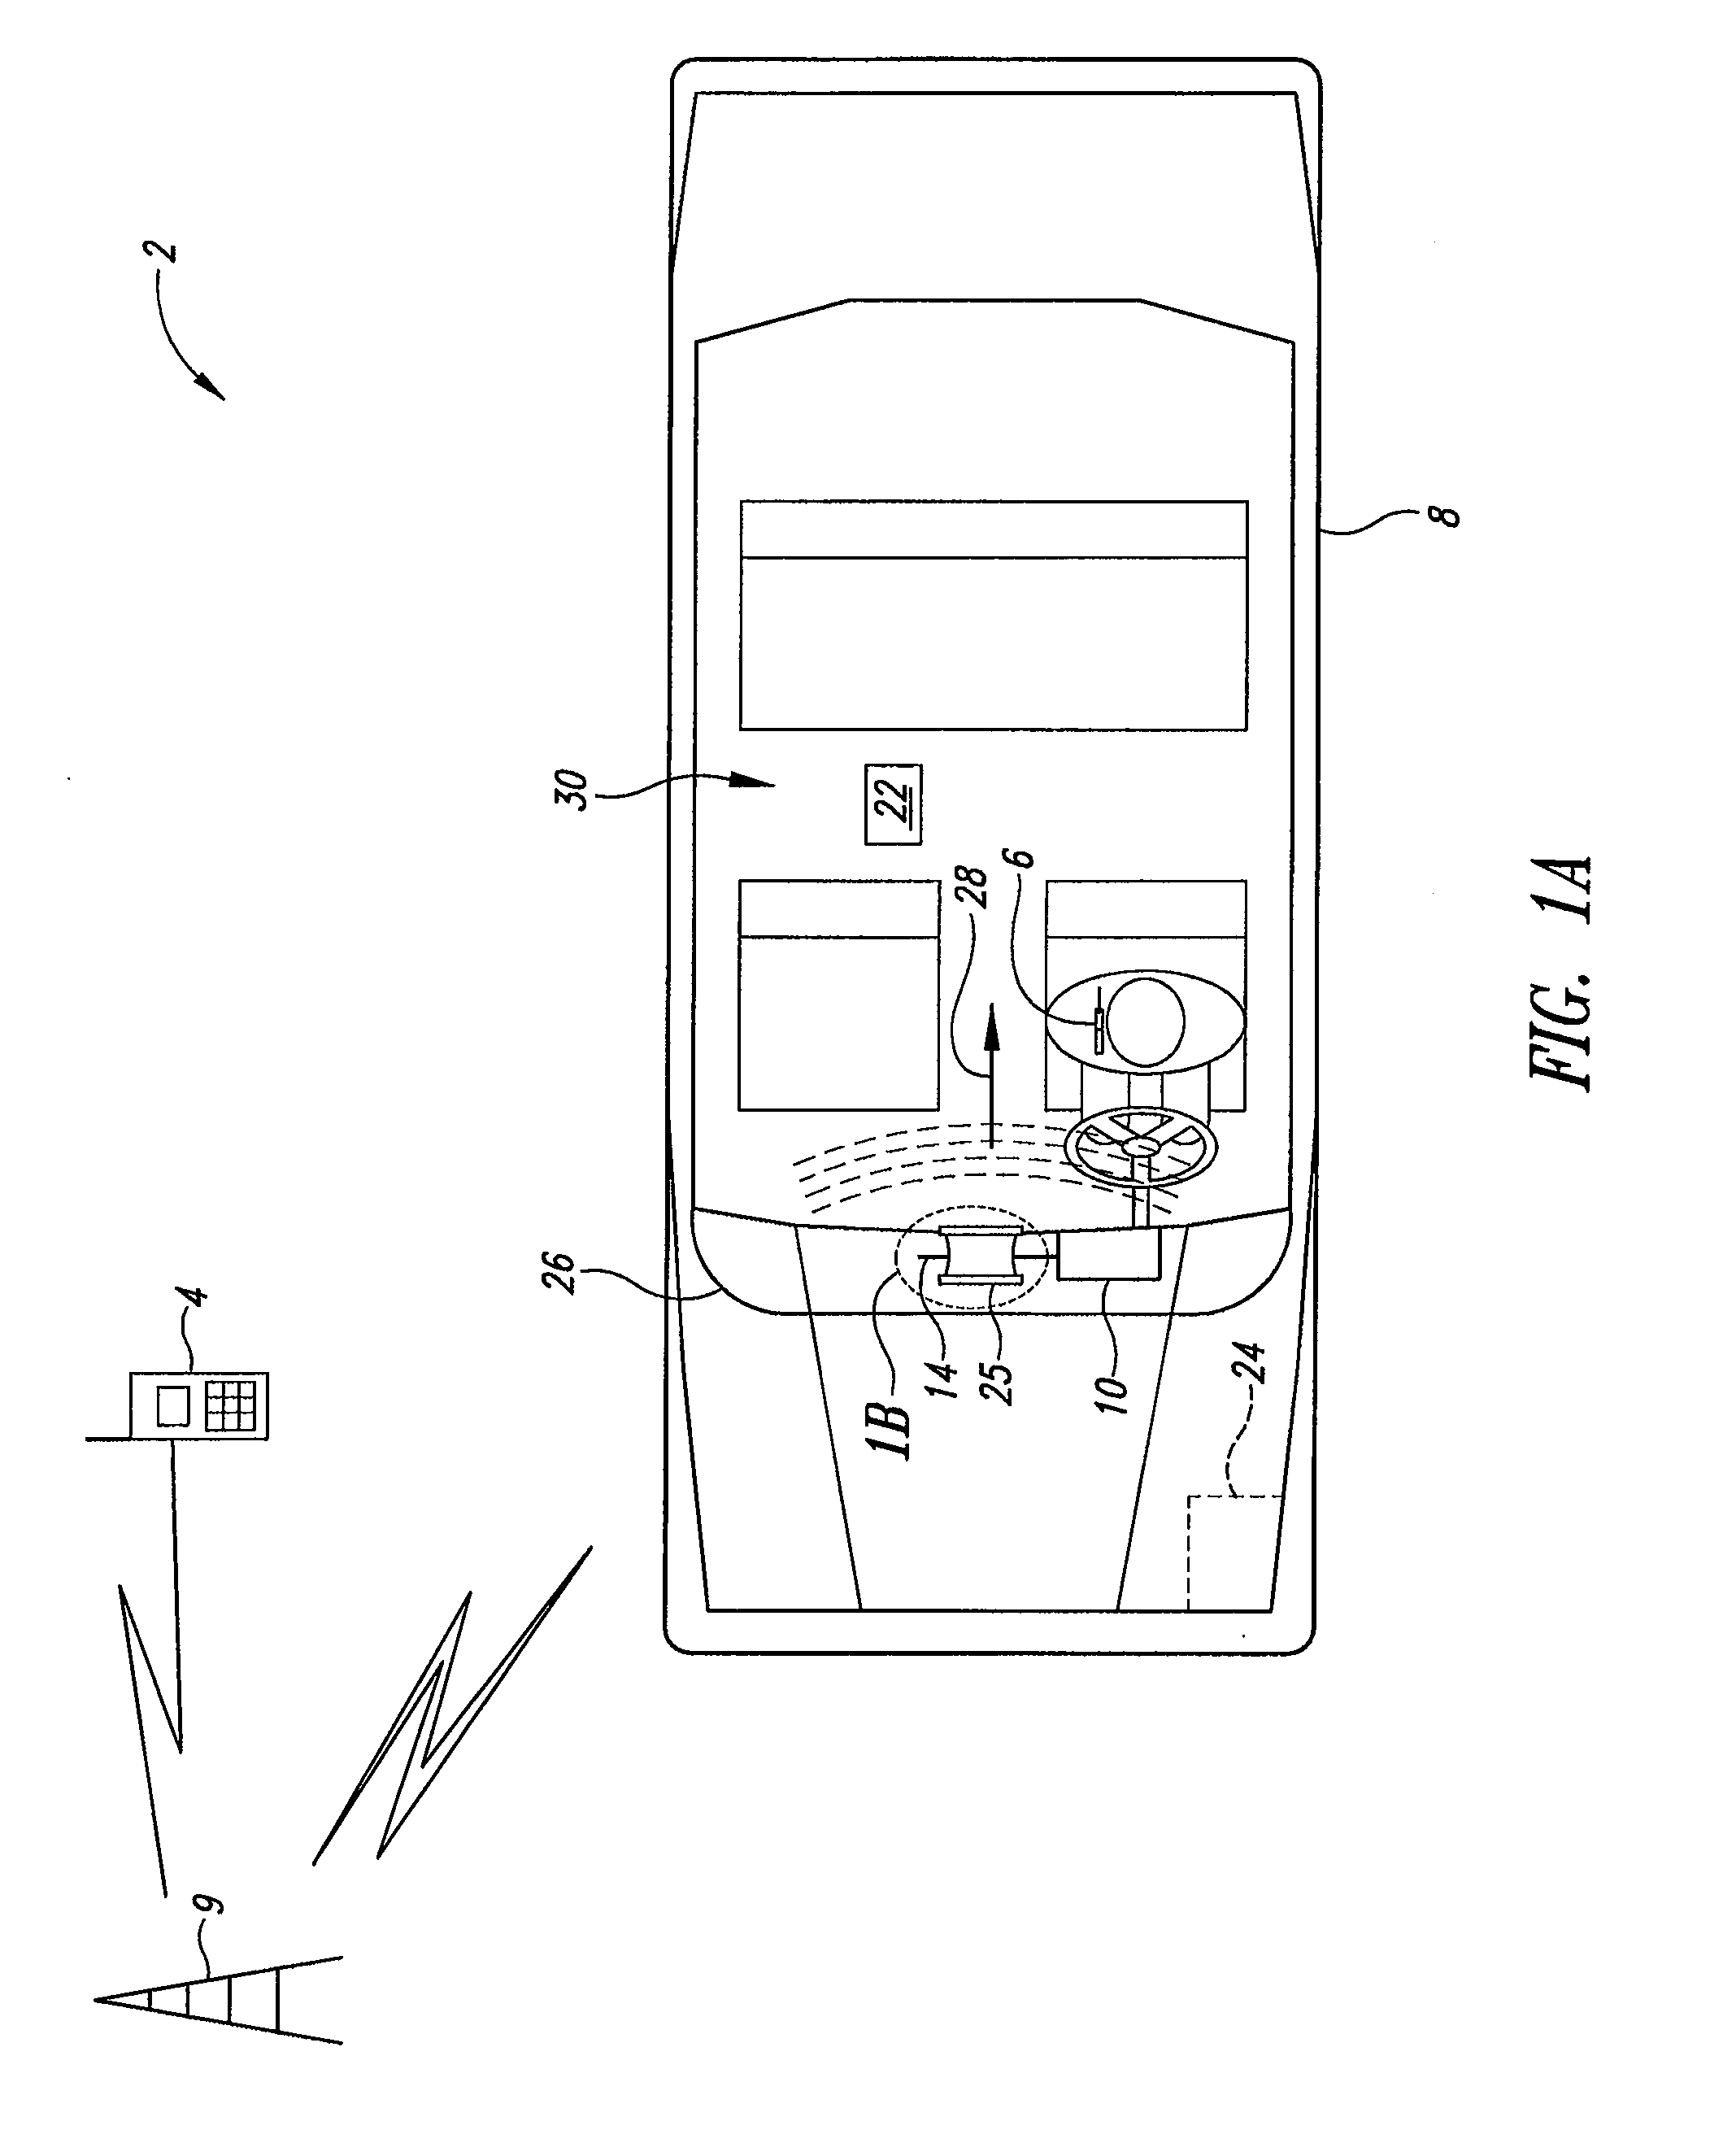 Apparatus and method for interfering with wireless communications devices in response to transmission power detection